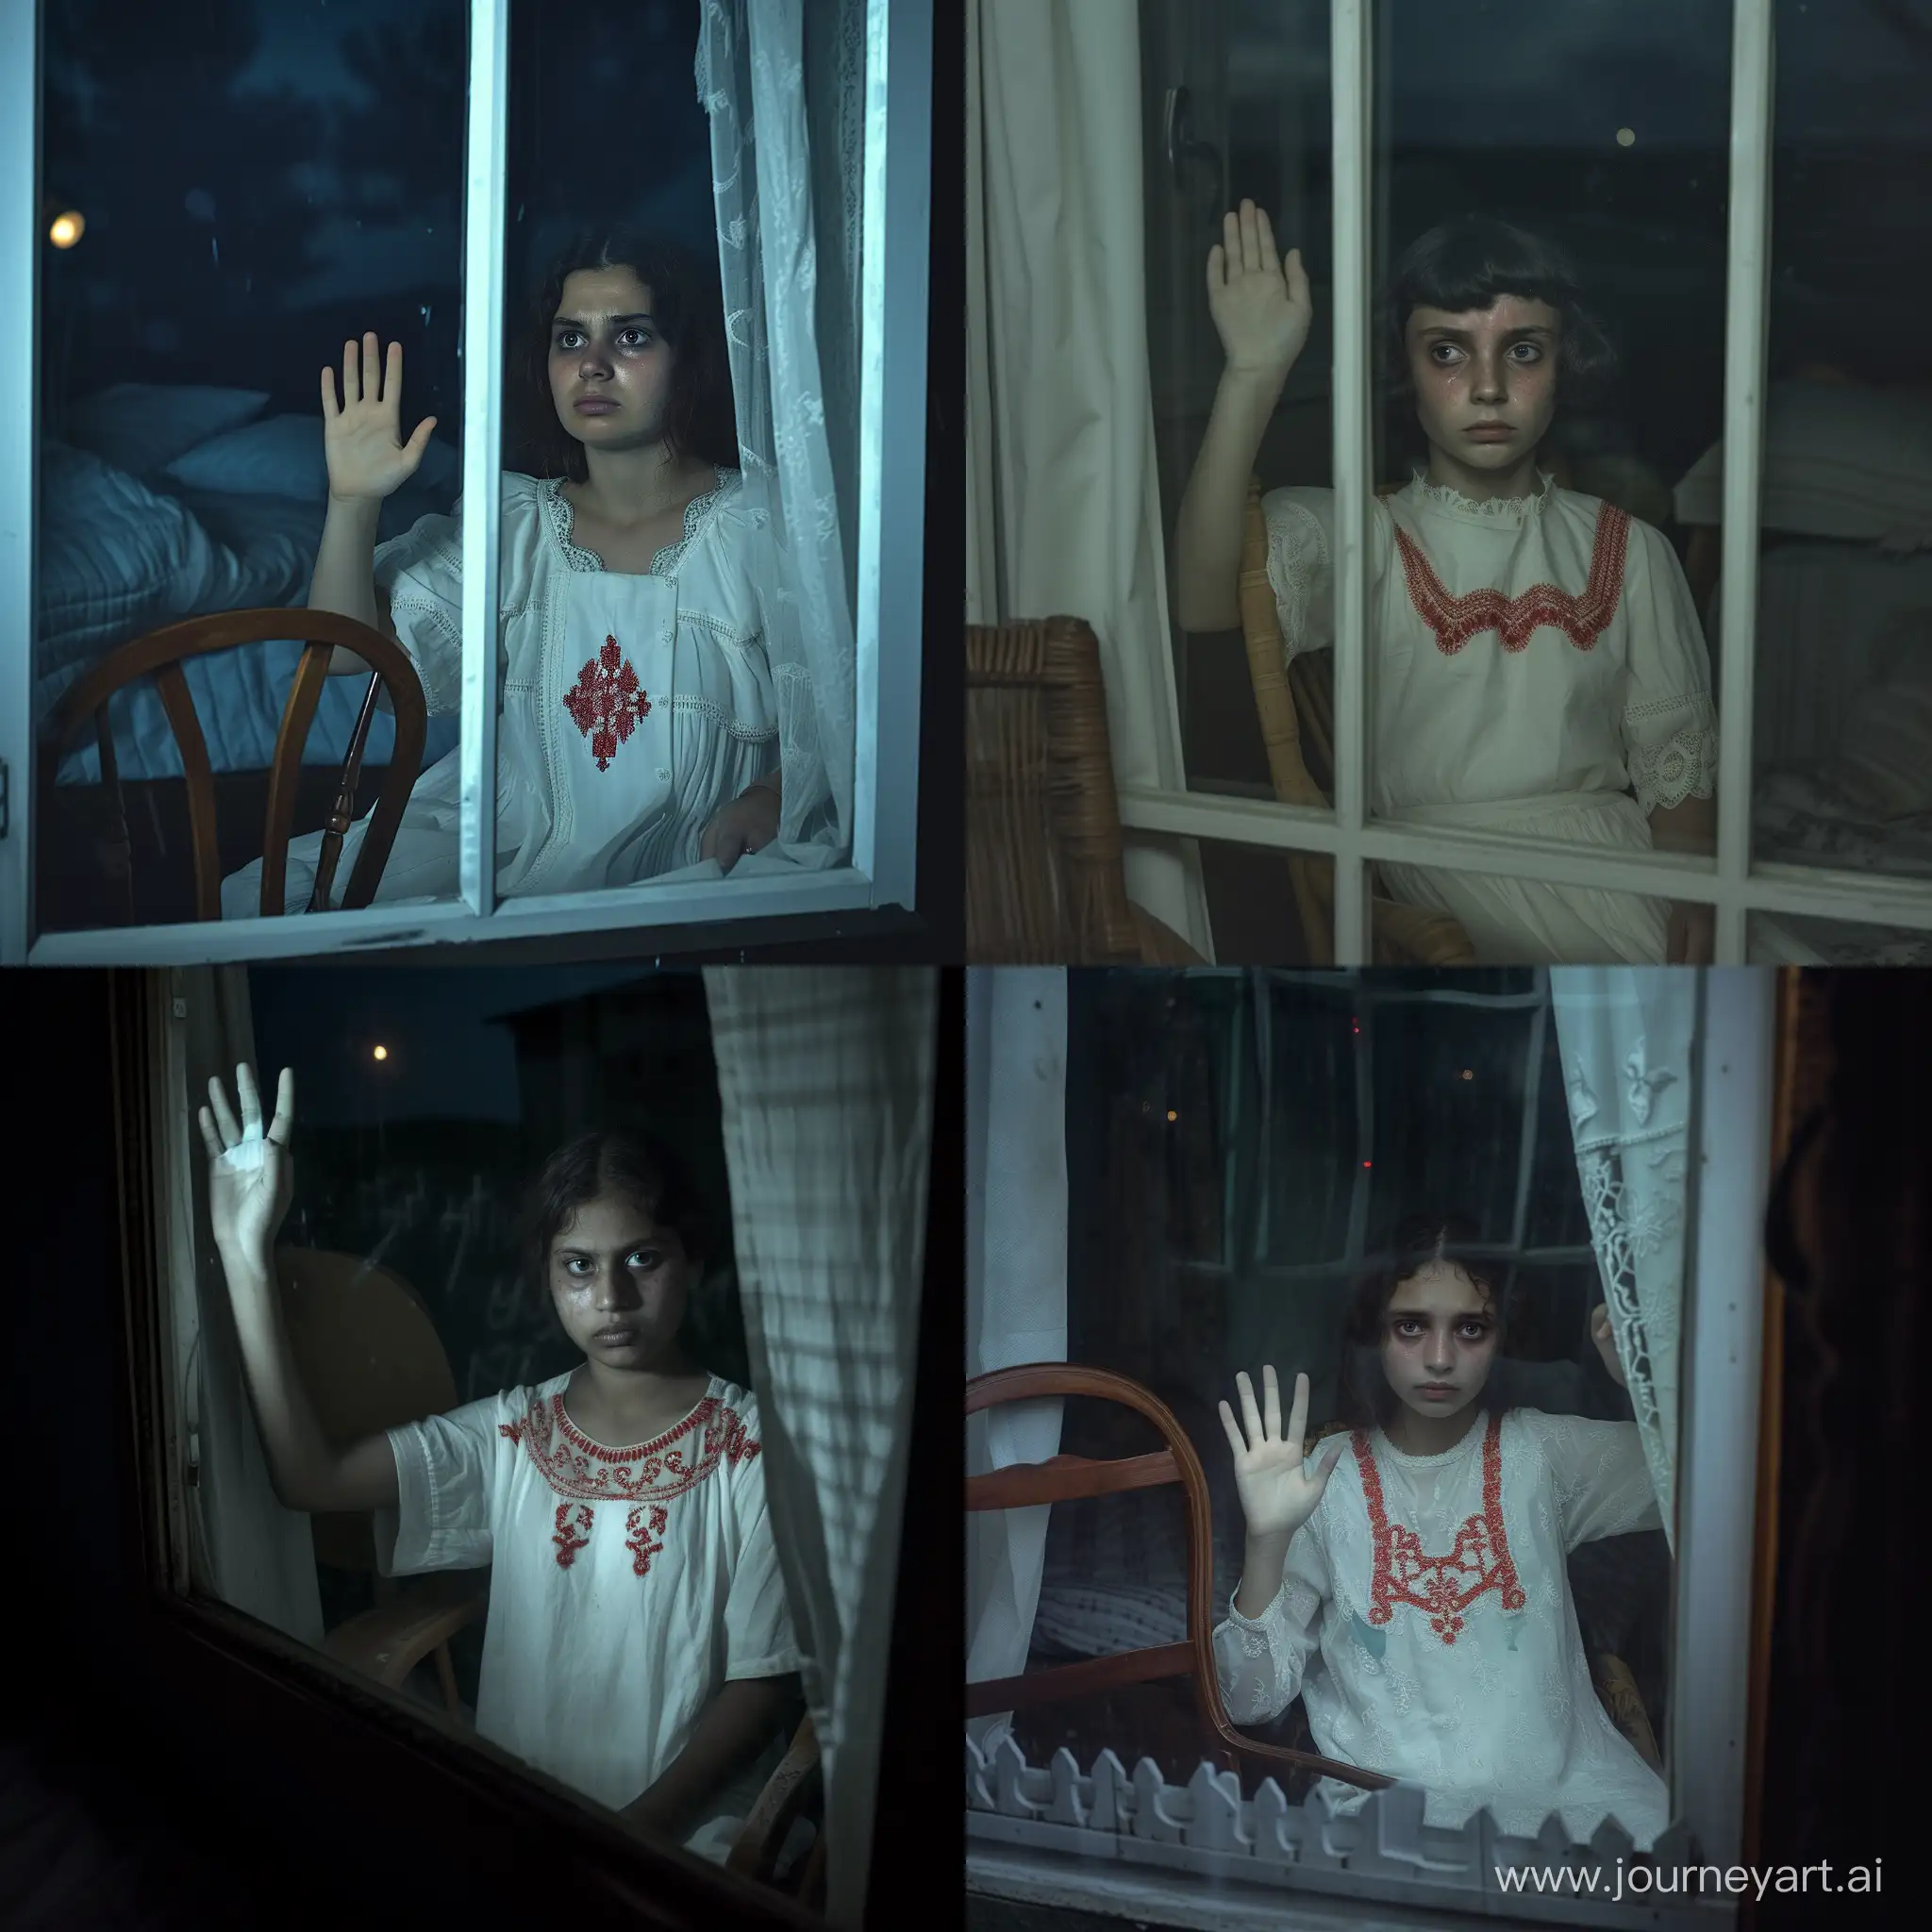 a girl looking outside by window, girl looking sad, certain is waving, white certain, the face of the girl is not looking clear, girl wearing a white frock having red embroidery on it, chair near the girl, there is a bed near this window, the lights are off of the room, night photodraphy, dark photography, moon light, scene is from inside of the room